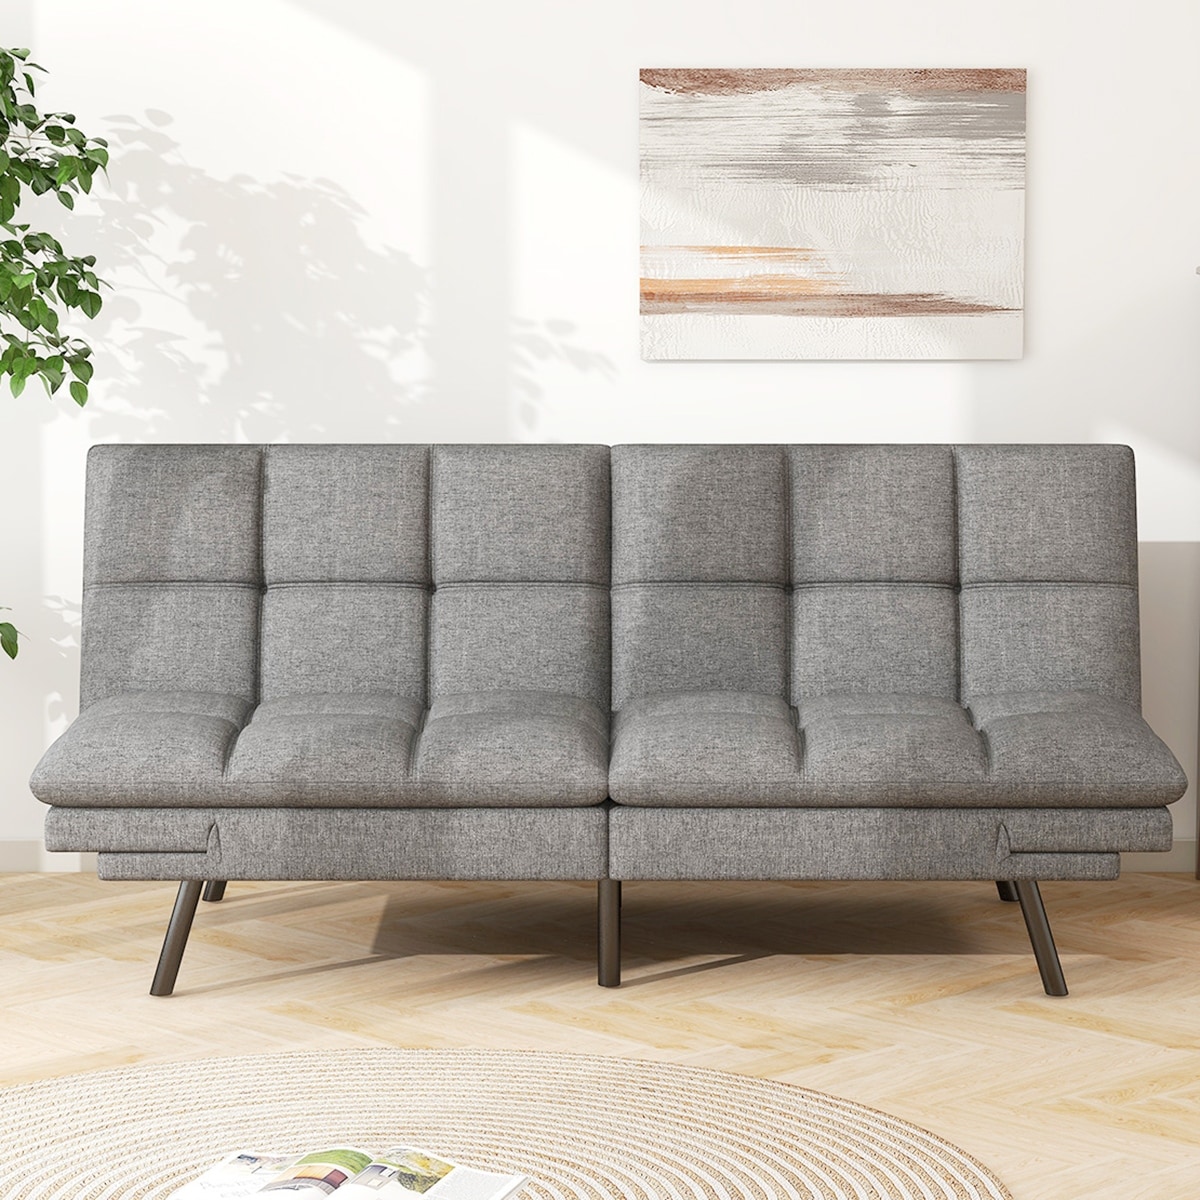 Convertible Memory Foam Futon Sofa Bed with Adjustable Armrest-Gray | Costway